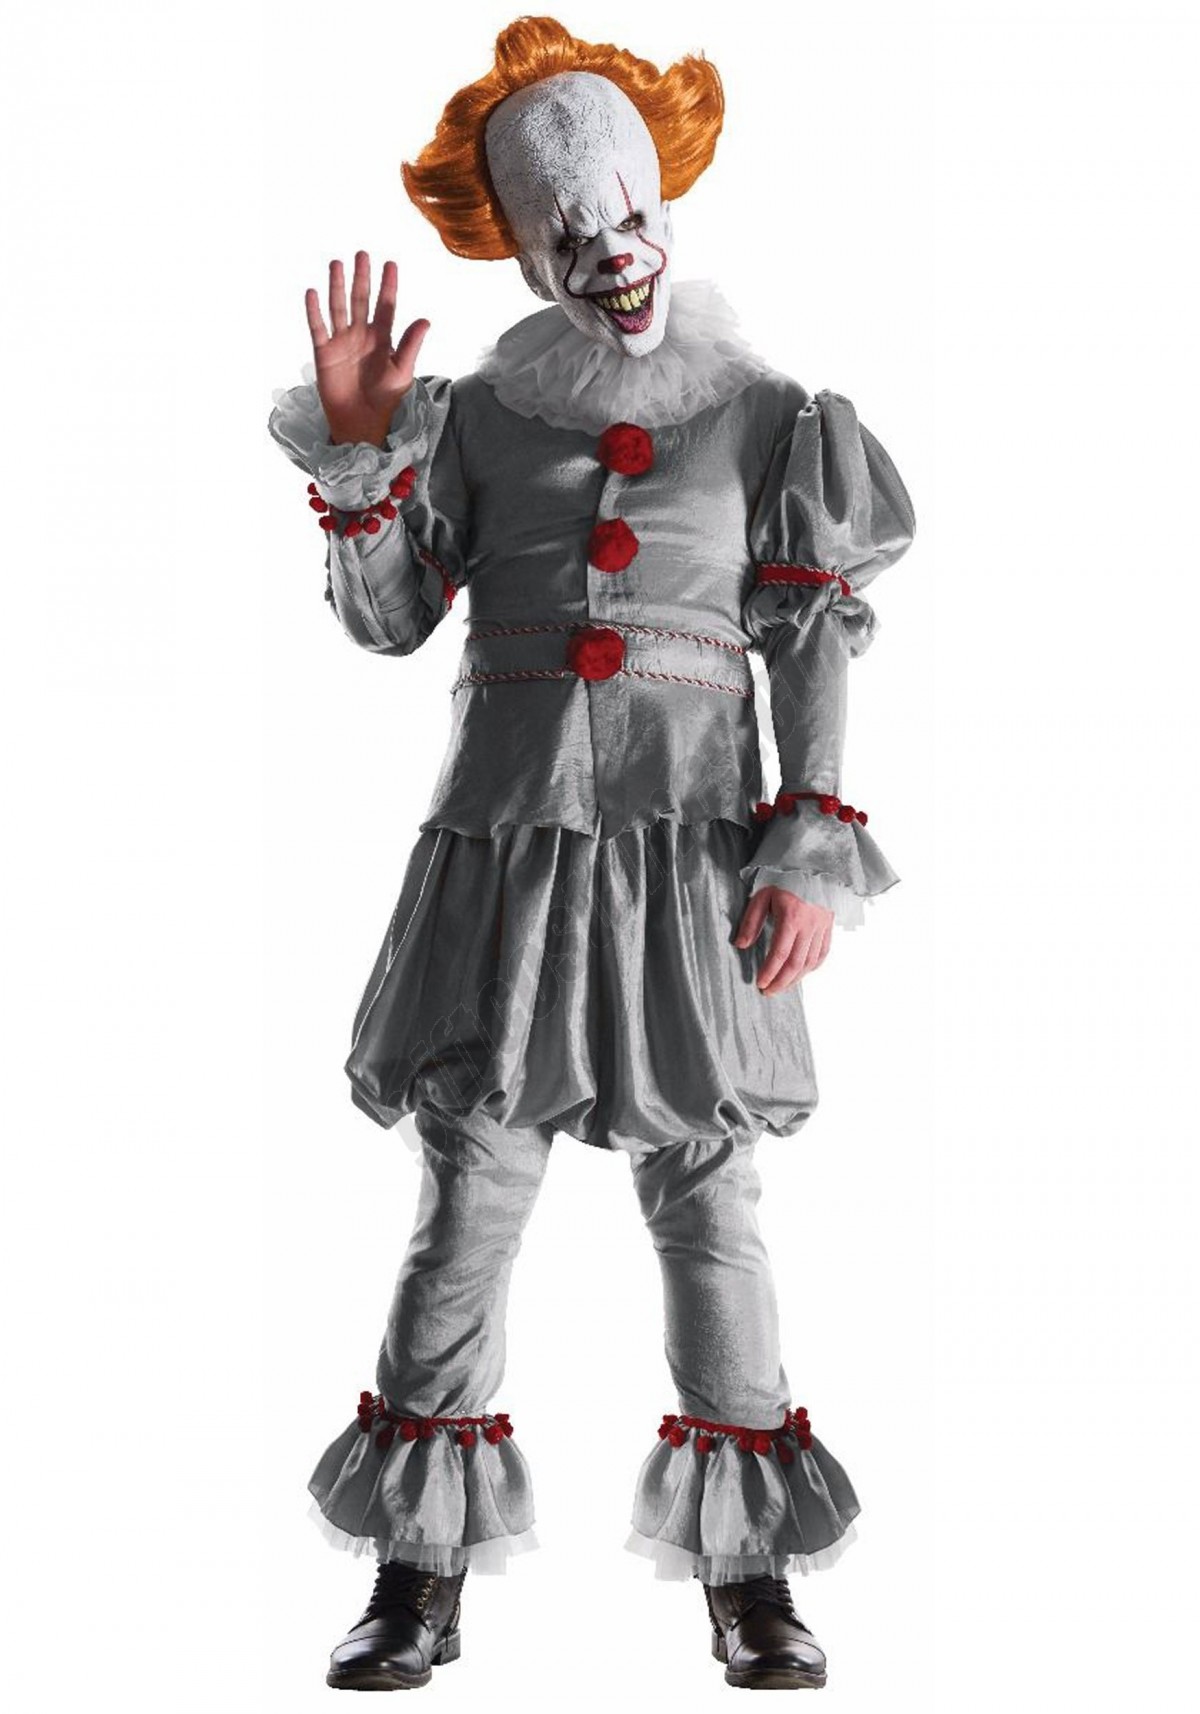 Grand Heritage Pennywise Movie Adult Costume - Men's - -0